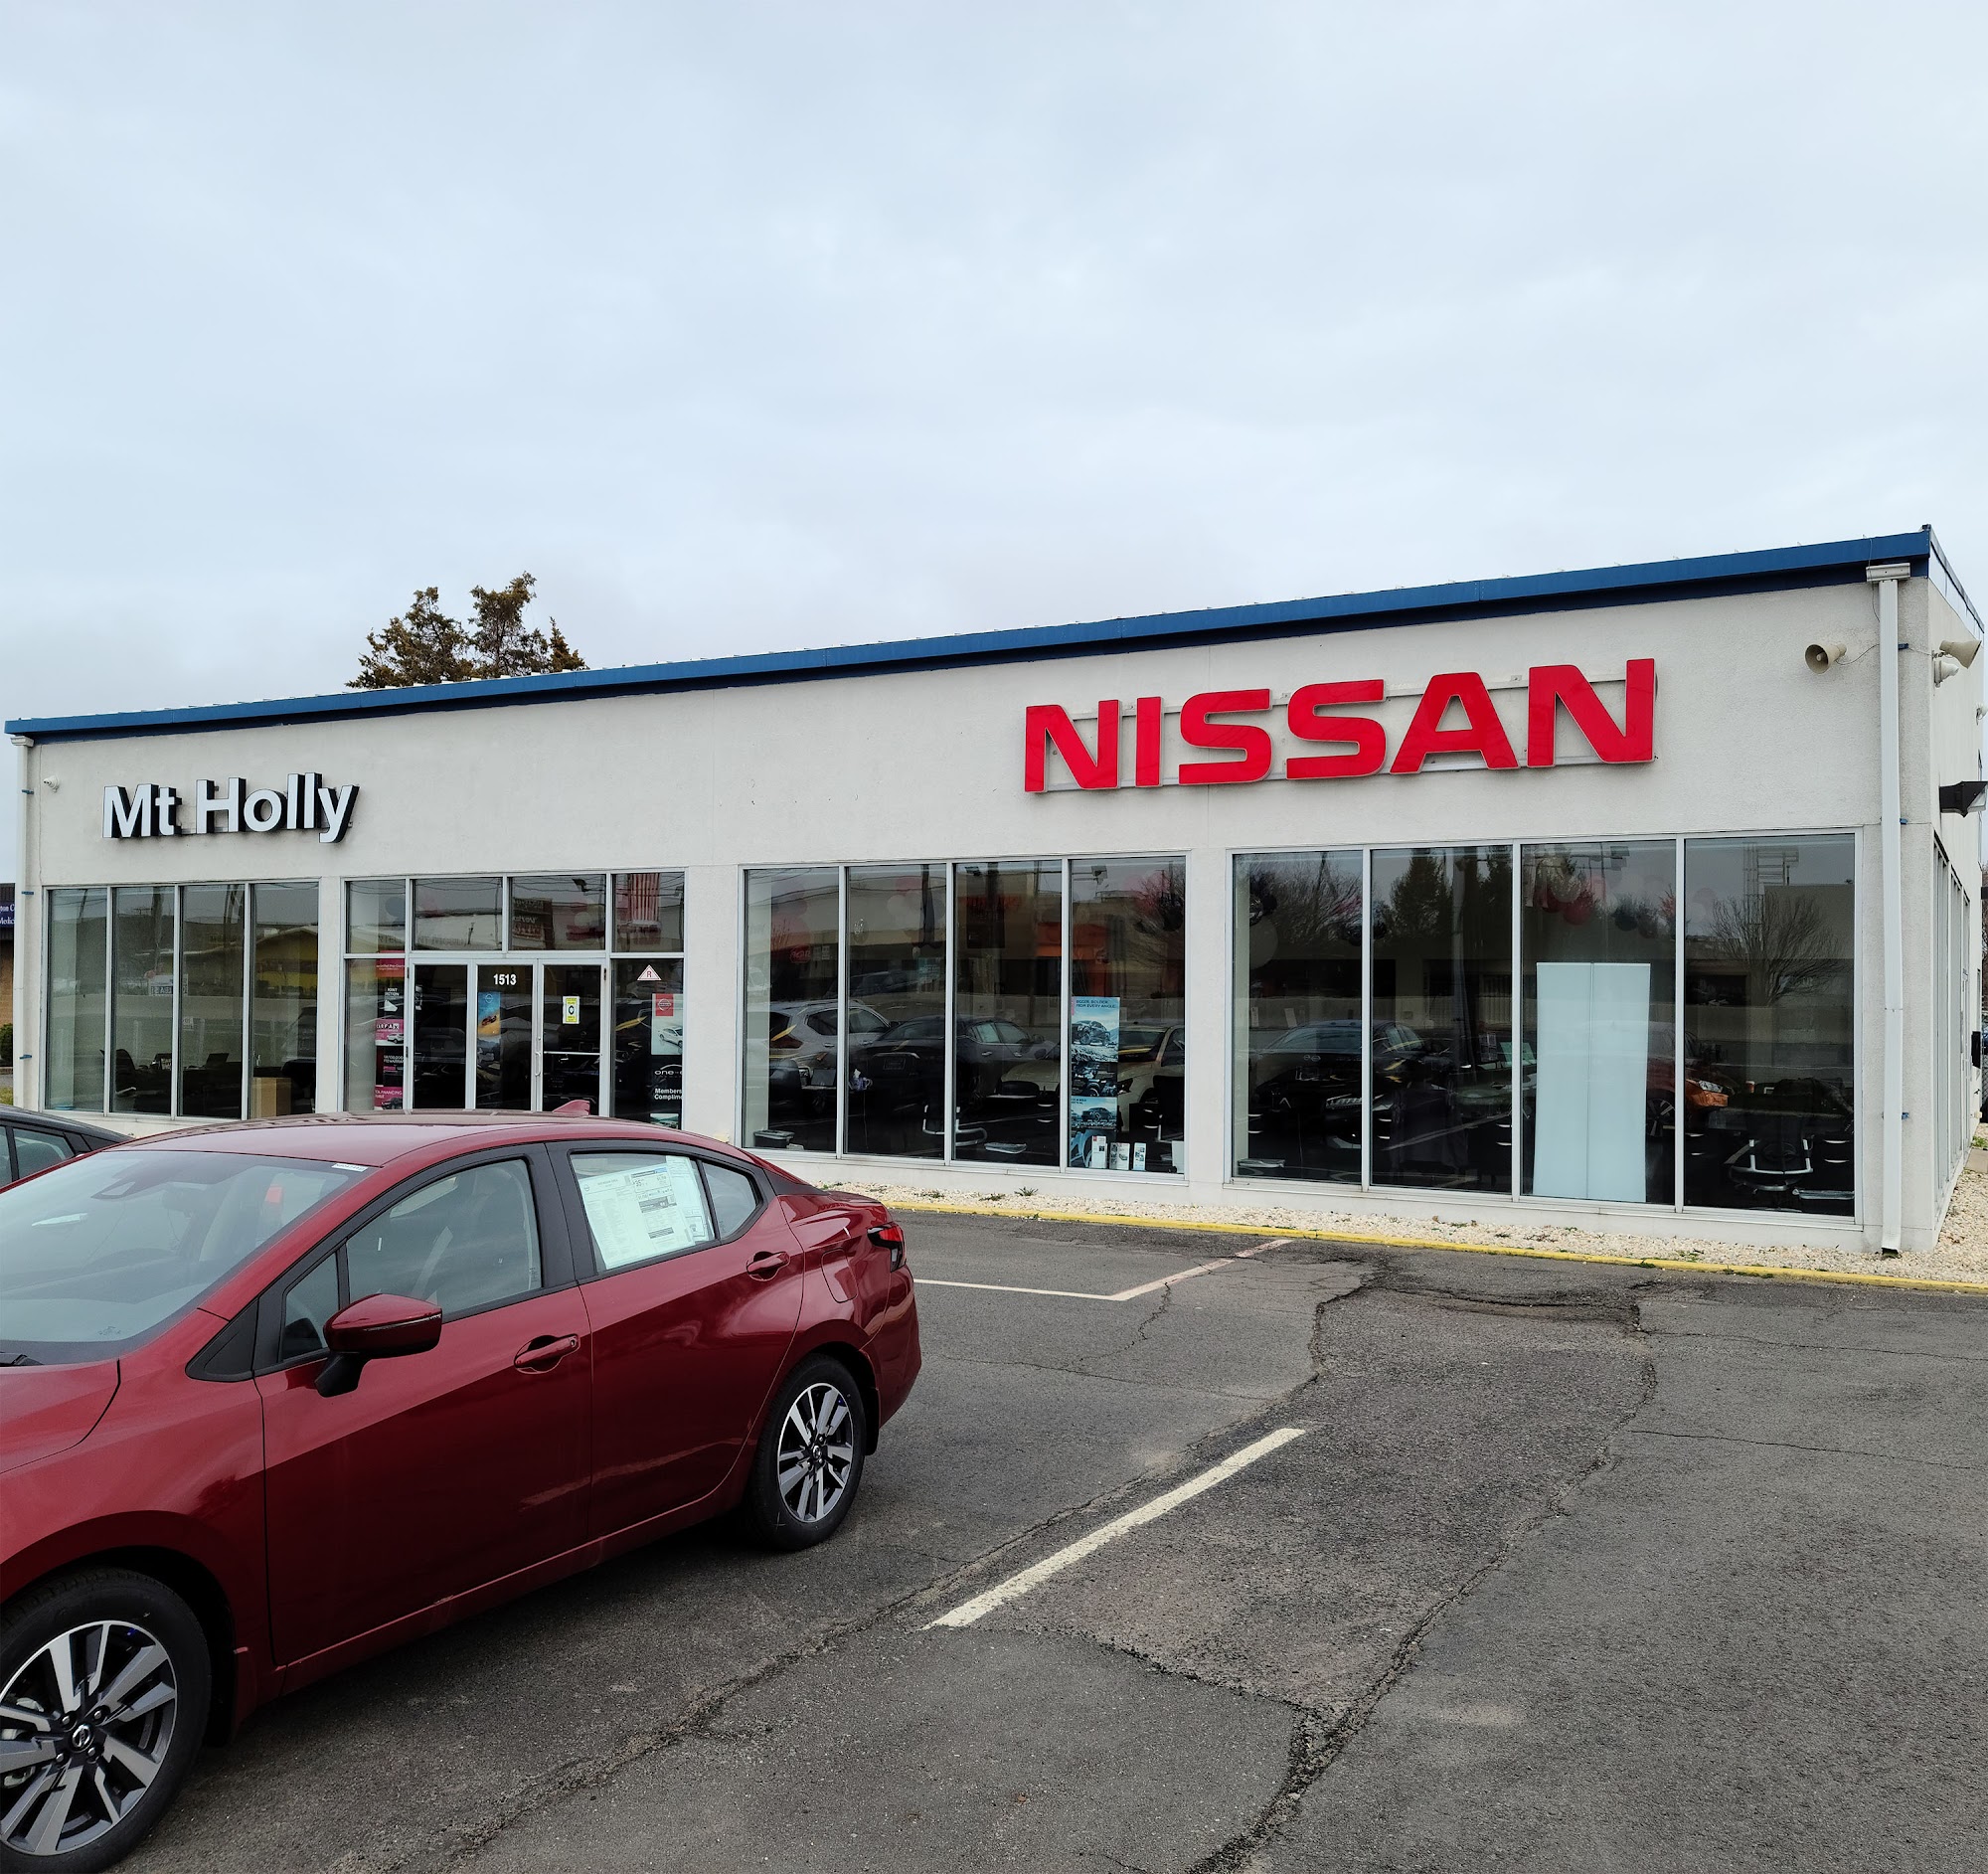 Mount Holly Nissan